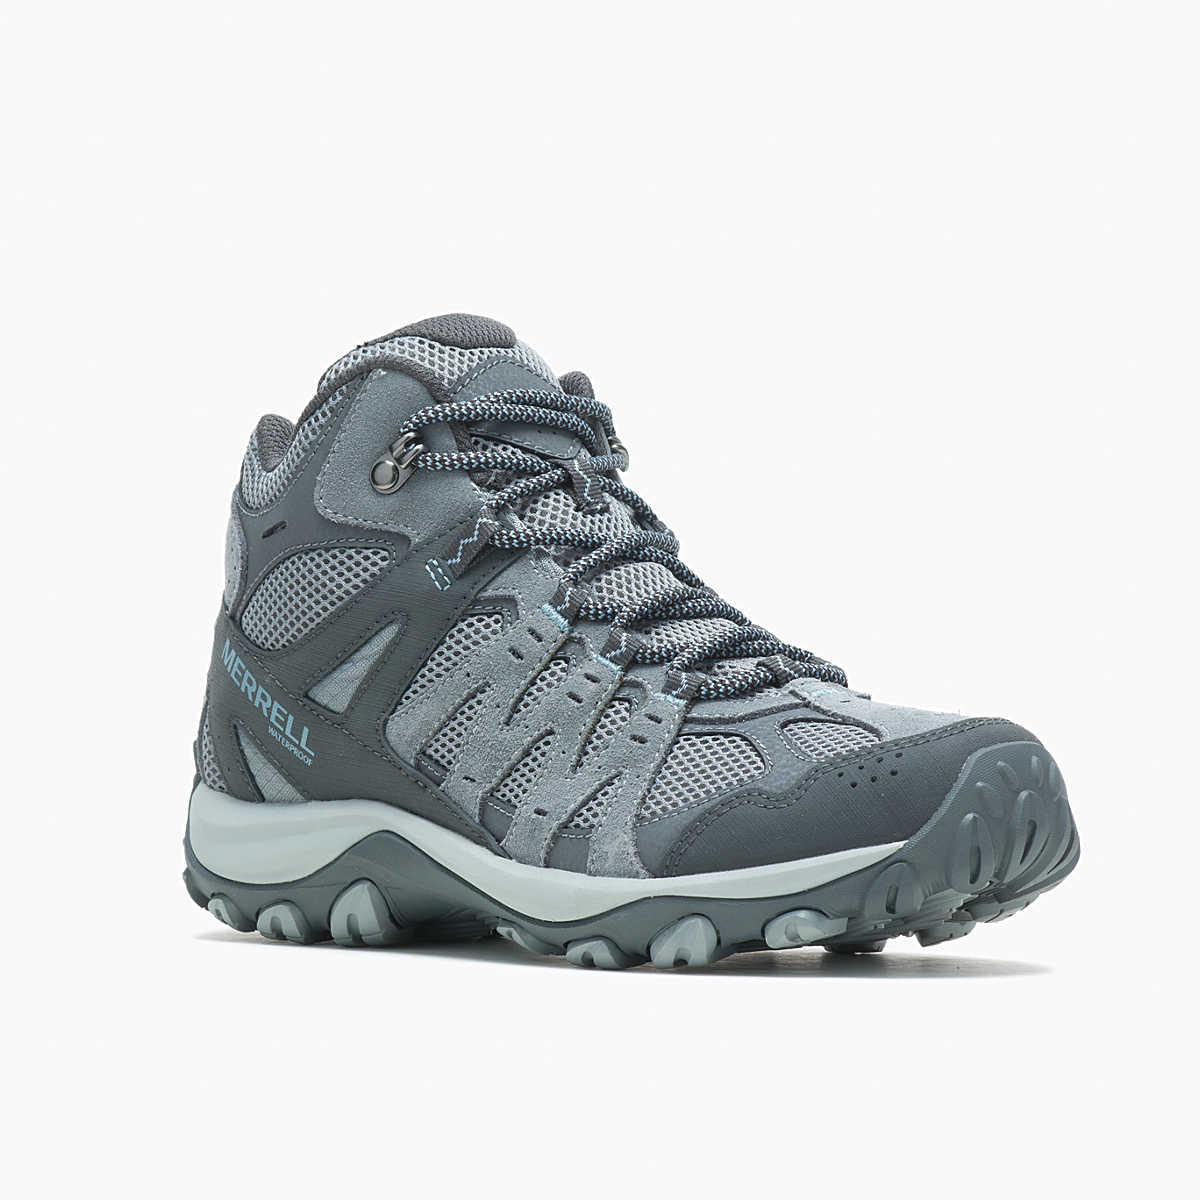 Accentor 3 Mid Waterproof::Monument